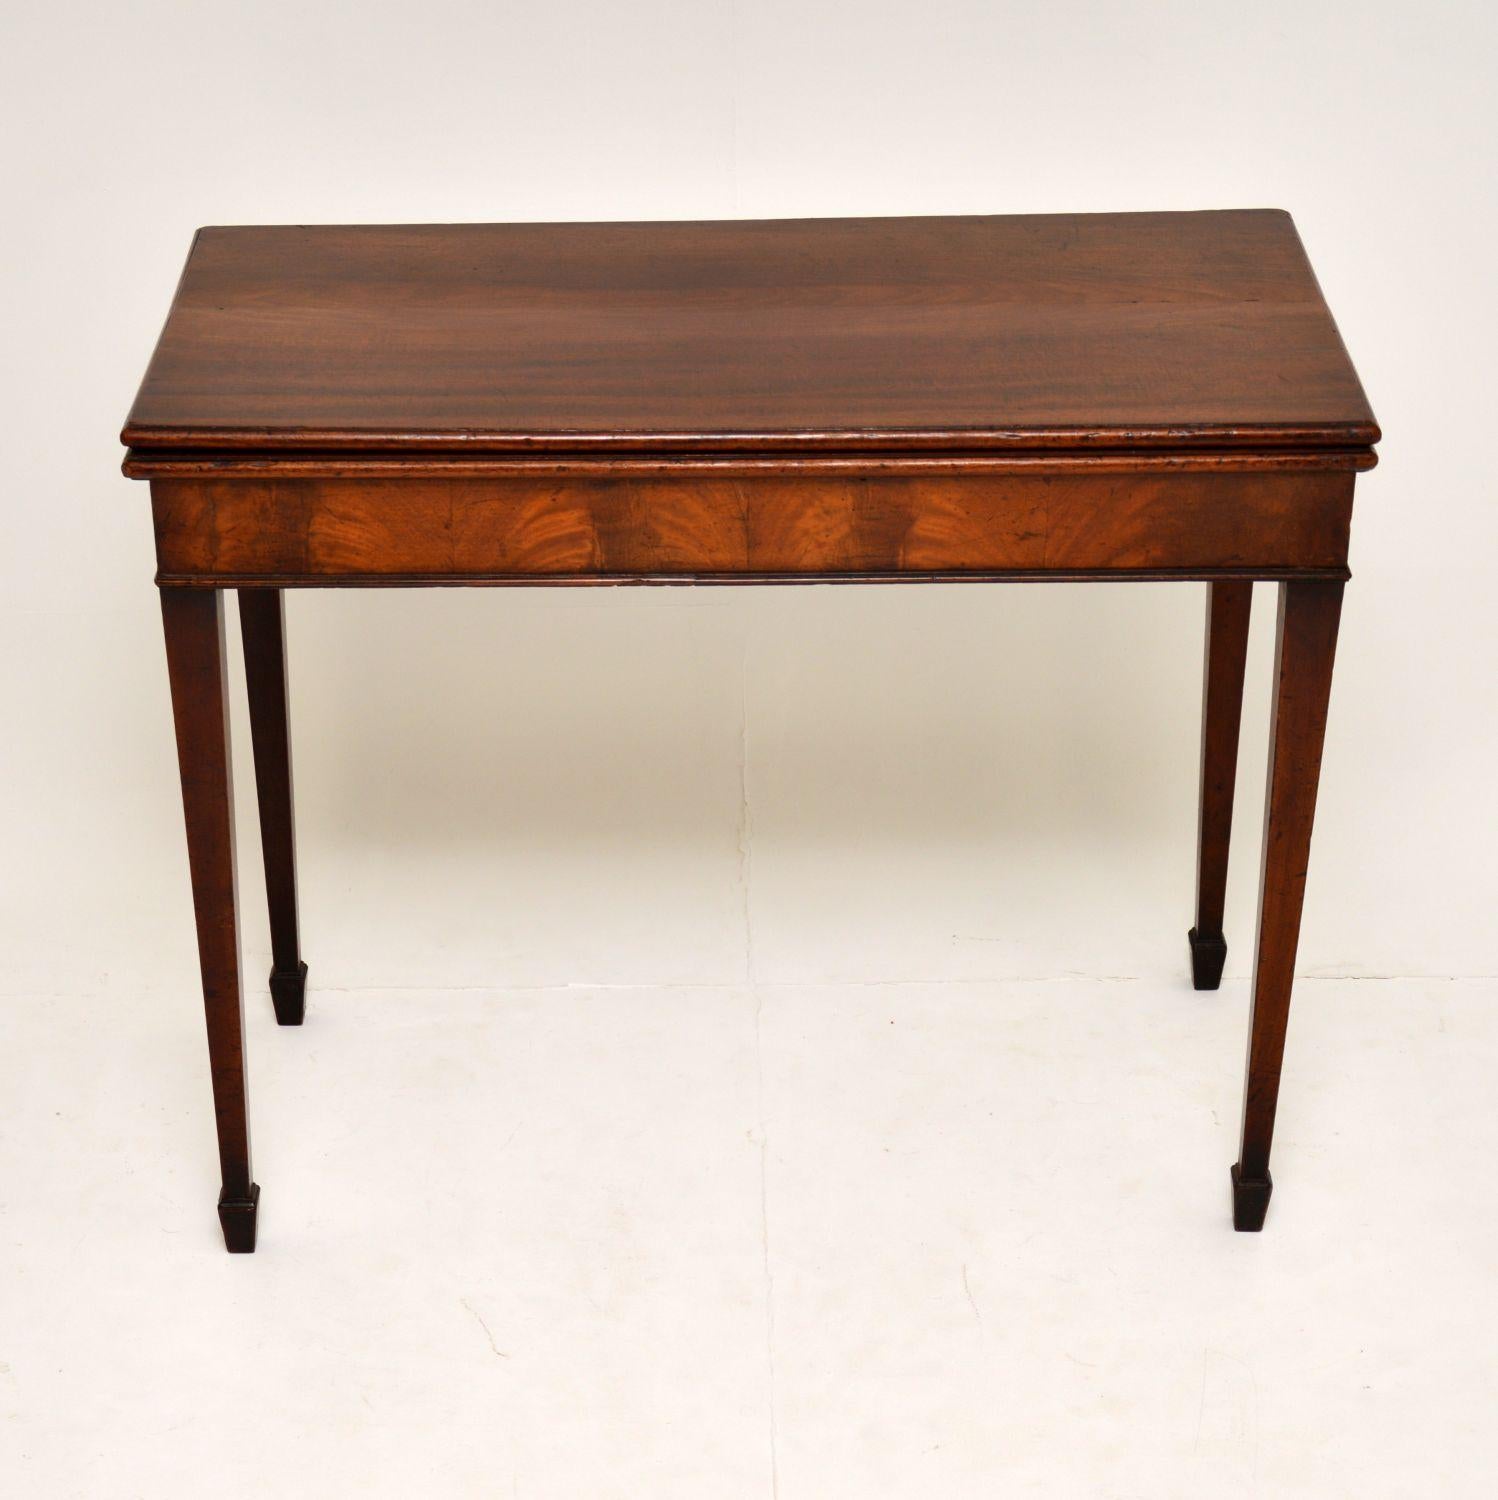 Antique George III period mahogany card table in very good original condition and dating to circa 1790s period.

The back two legs open out to support the playing surface, which has just had a new baize cloth put on. There is a bit of evidence of